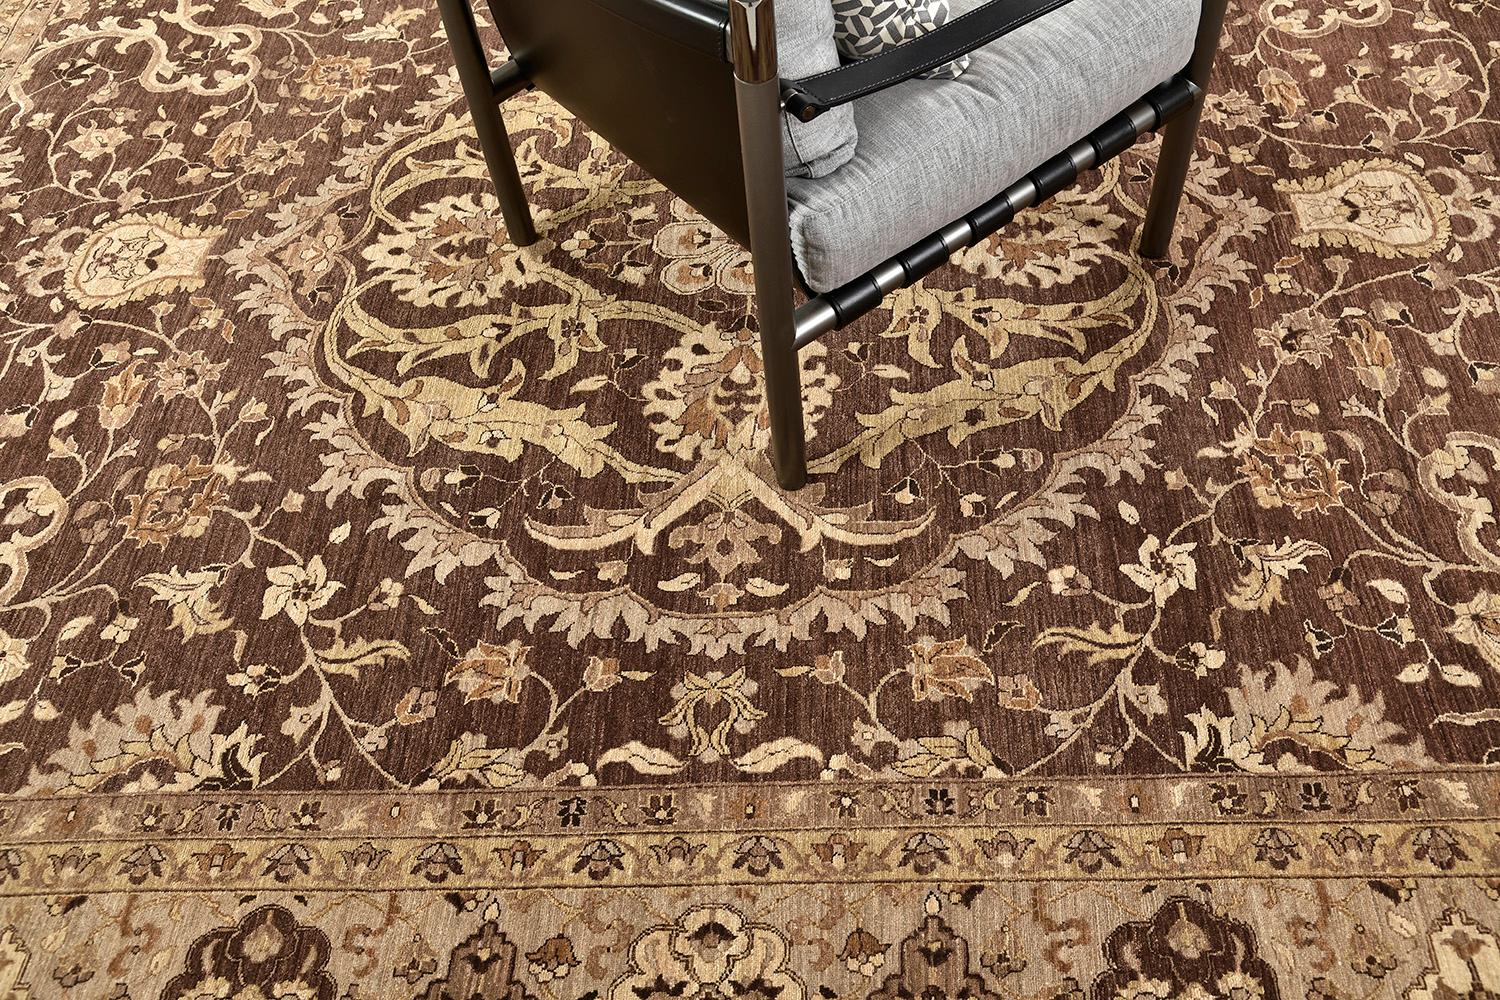 This dramatic revival of the Hadji Jalili rug has an intricate mirrored pattern of the symmetrical elegant floral scroll and a controlled ambiance of luxurious neutral tones with symmetrical motifs of borders. This masterwork of art utilizes cozy